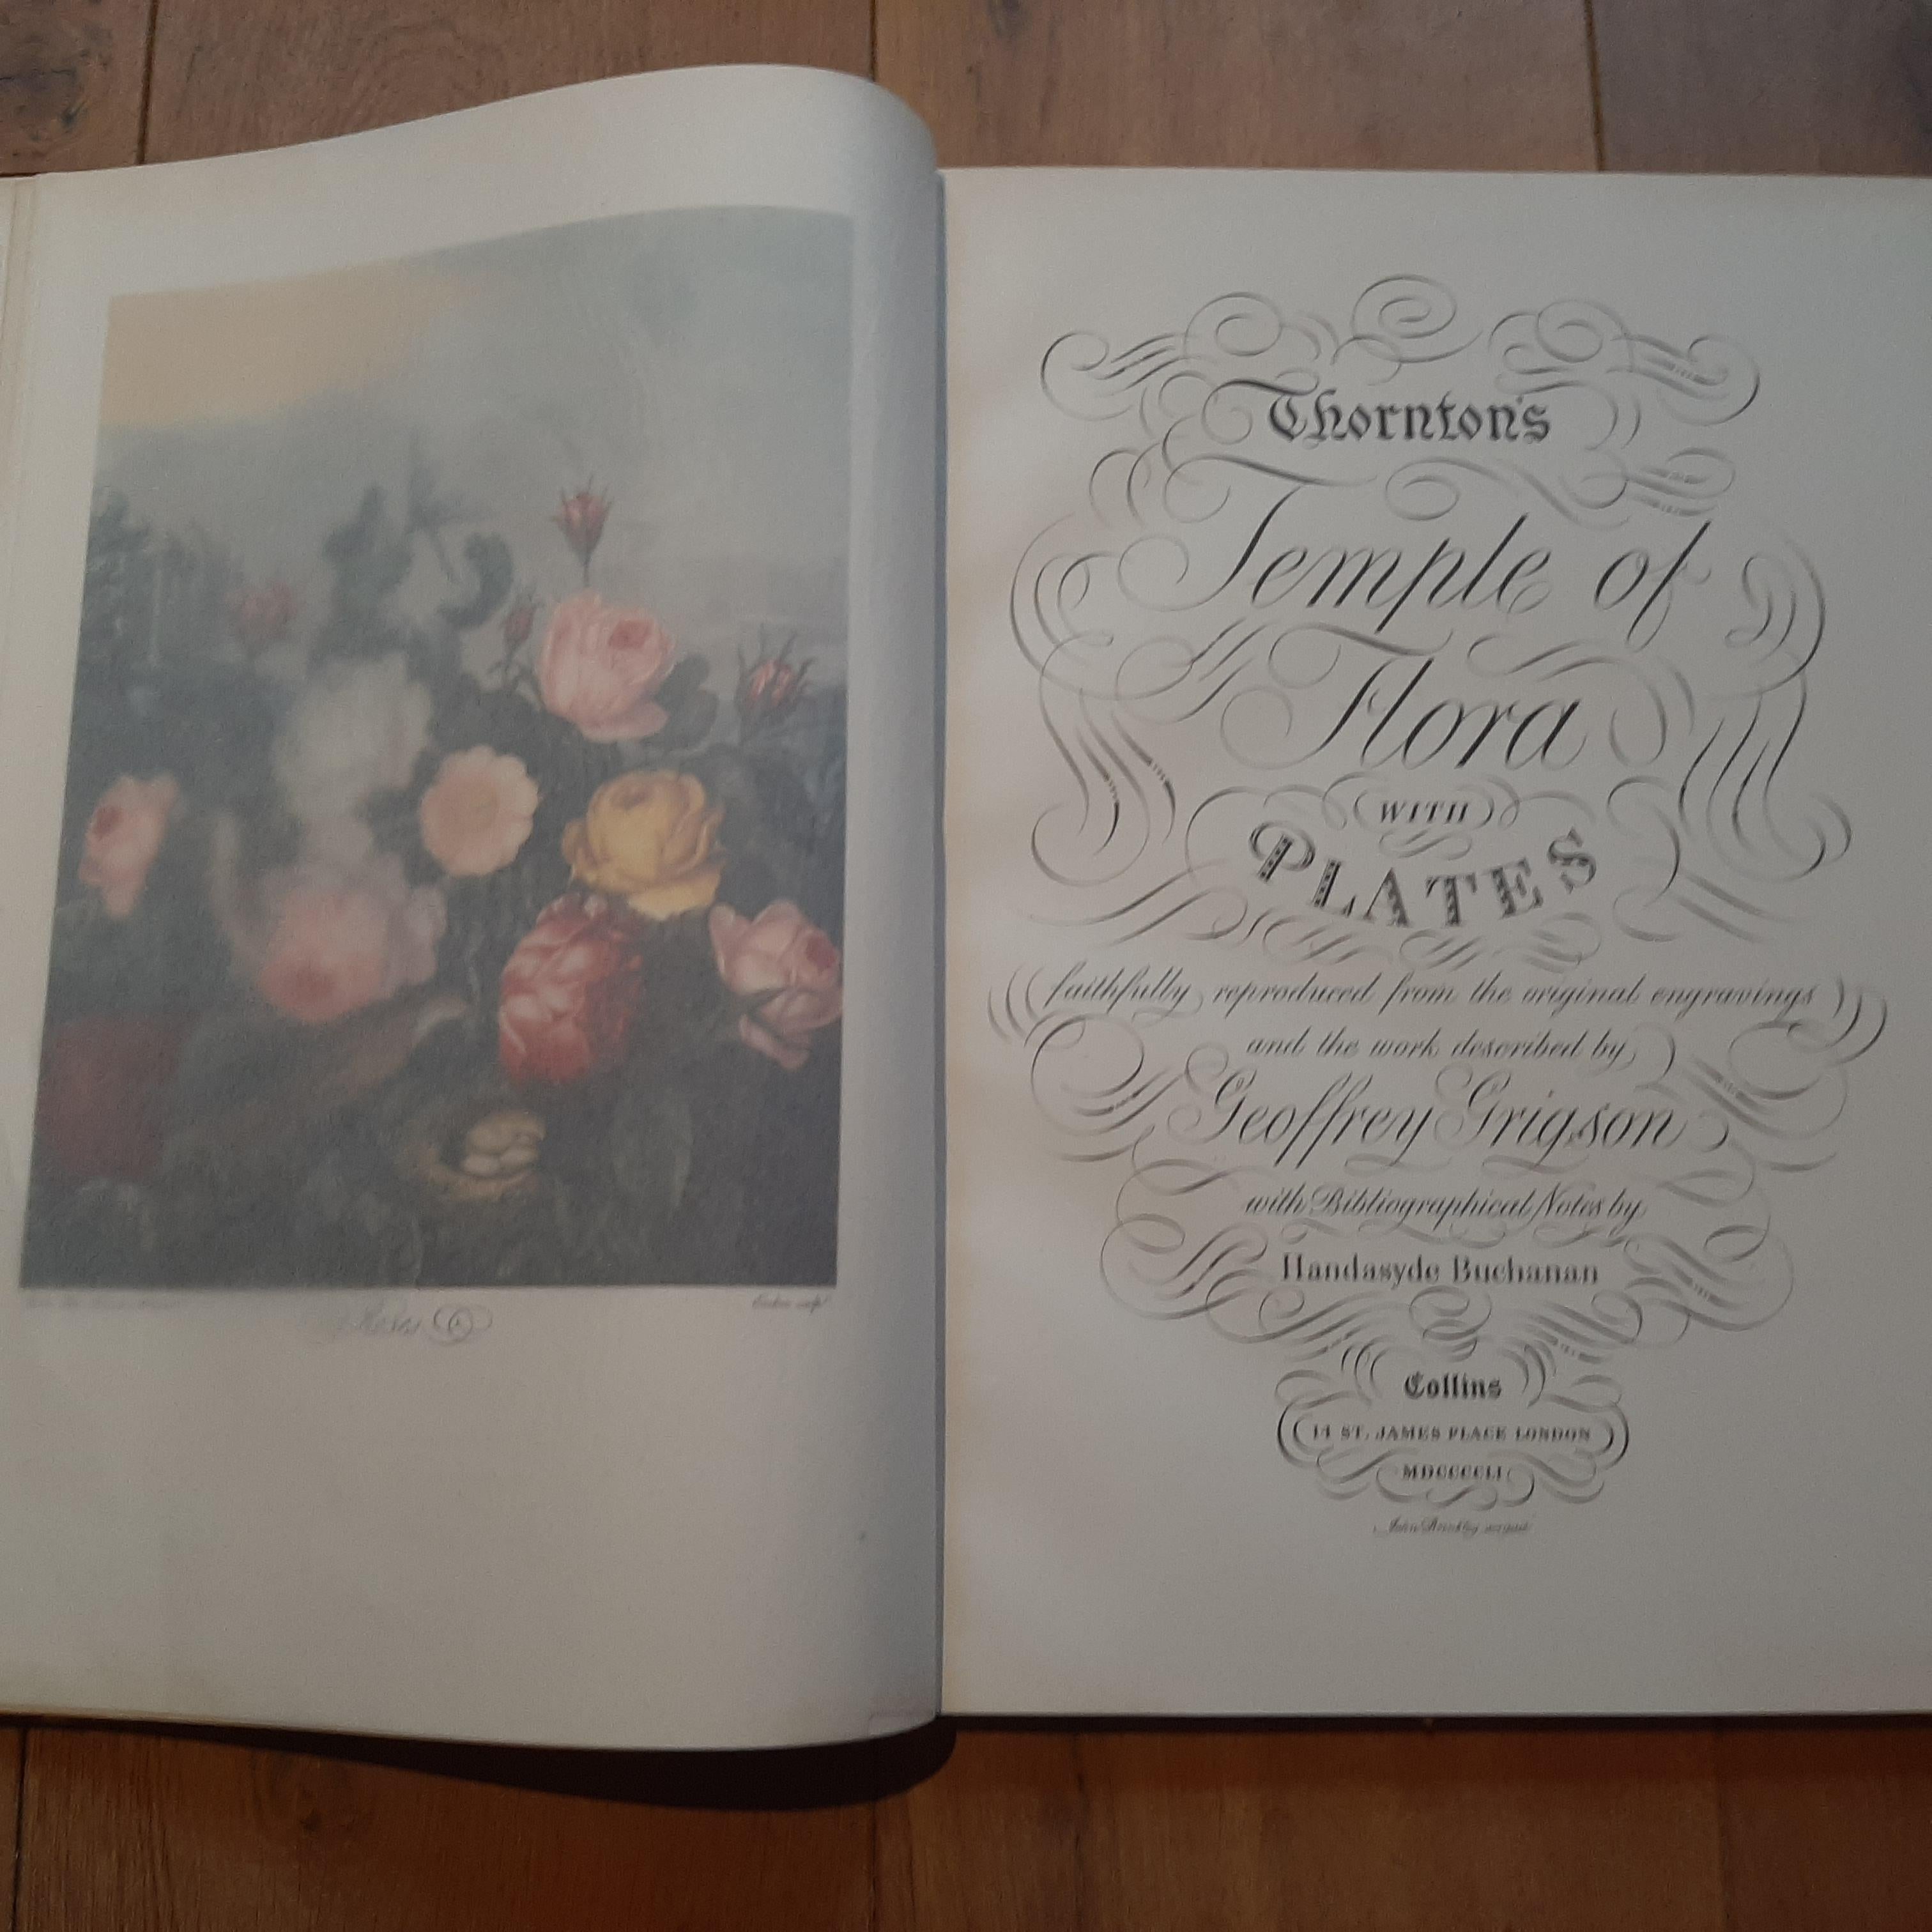 'Thornton's Temple of Flora' by dr. Robert John Thornton. With bibliographical notes by Handasyde Buchanan. London: Collins, 1951. Printed in the Netherlands. Complete with the 12 Colour Plates and 23 (of 24?) Black and white Plates. Limited Edition